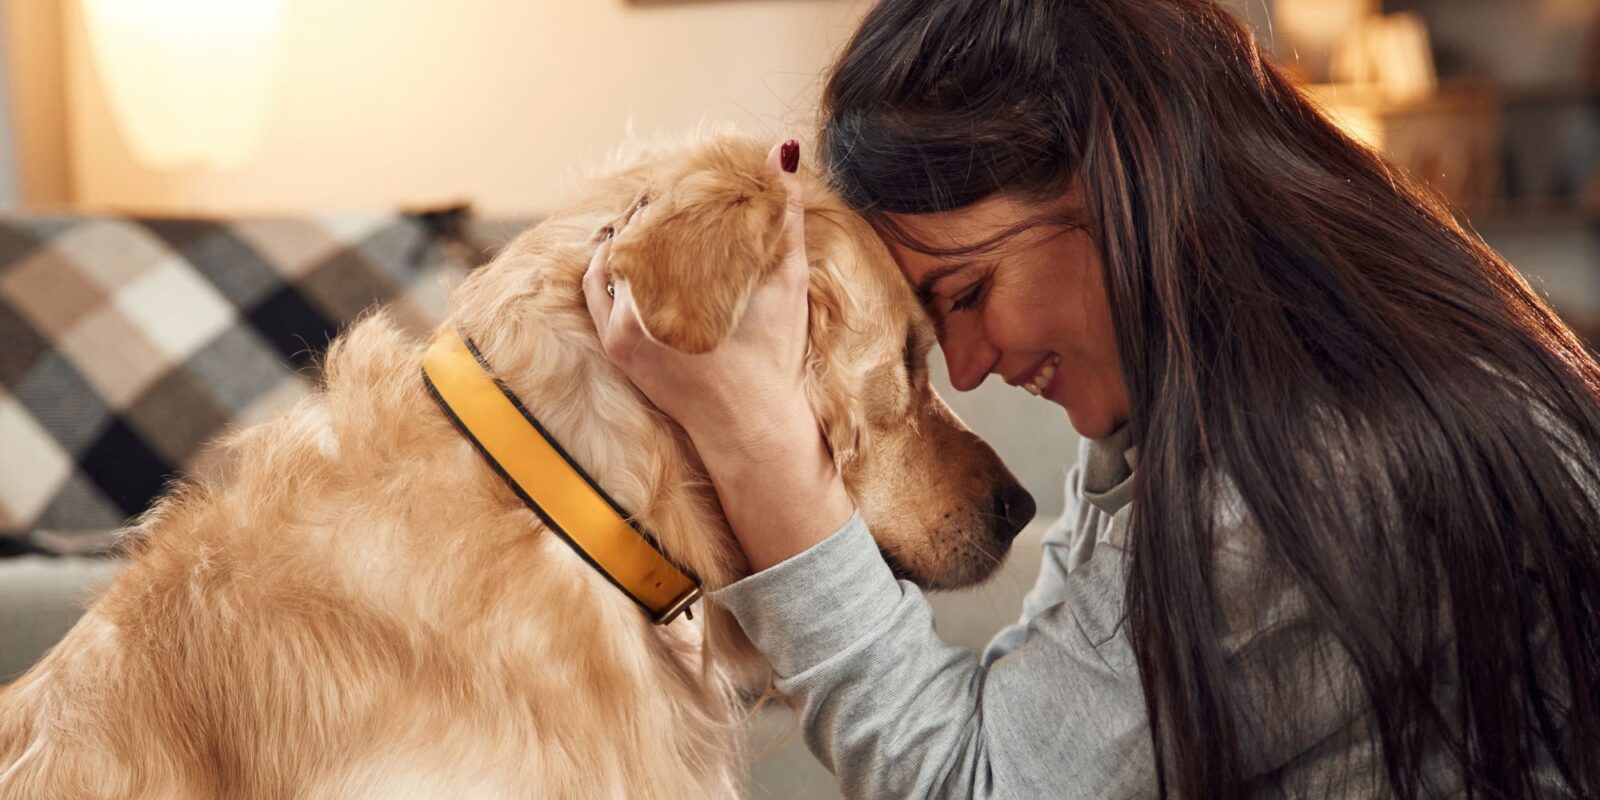 Woman is with golden retriever dog at home-Emotional Support Dog Breeds